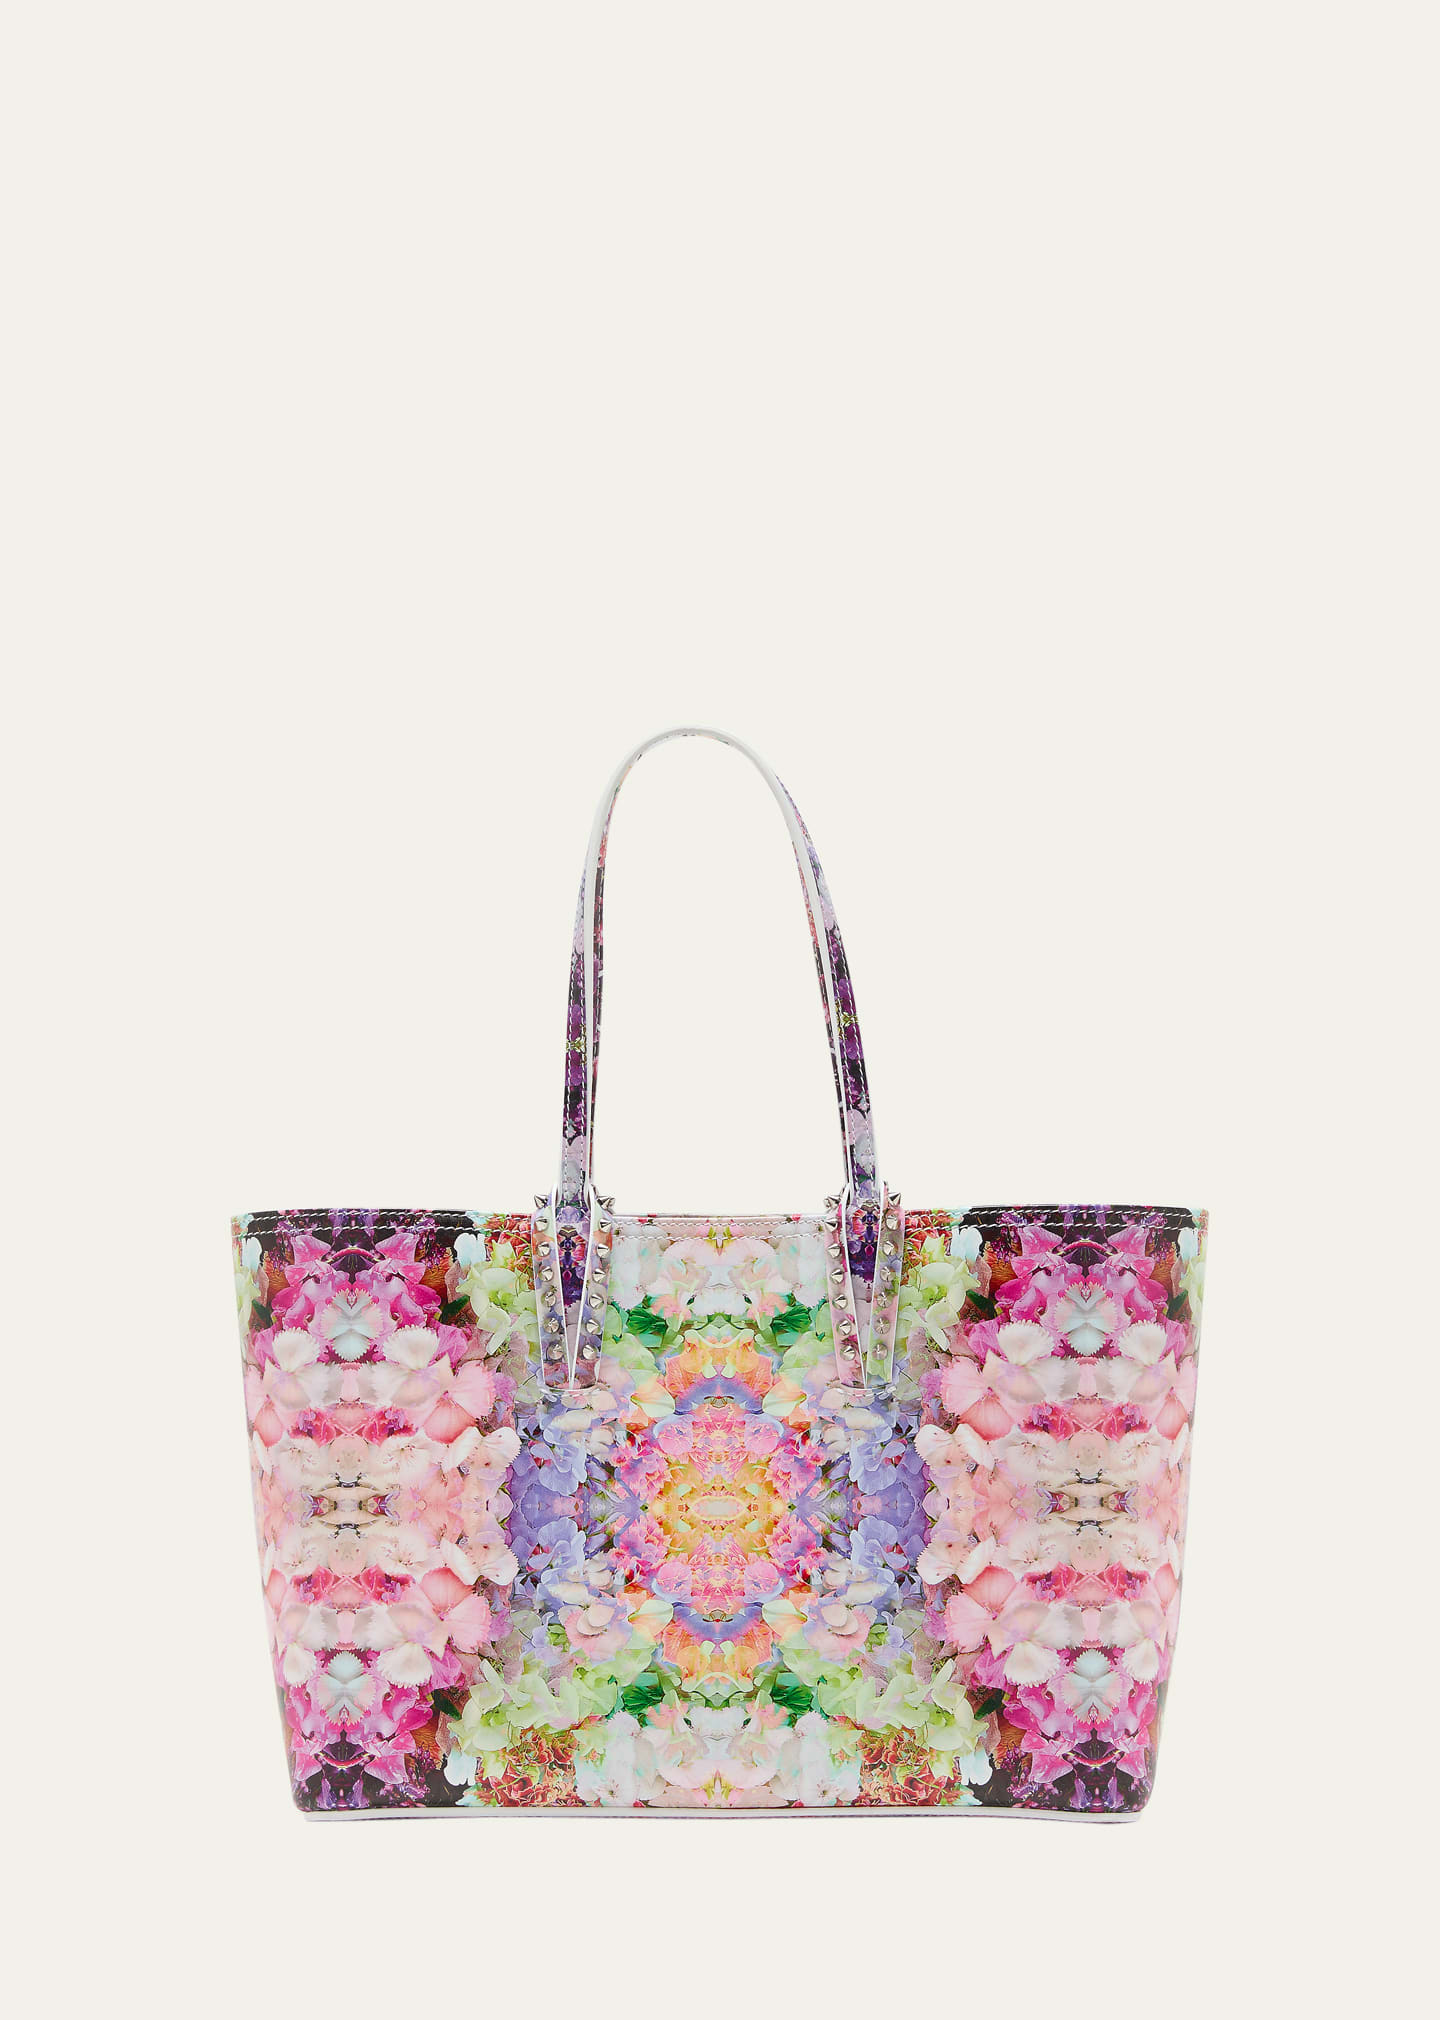 Cabata Small Tote in Paris Blooming Patent Leather